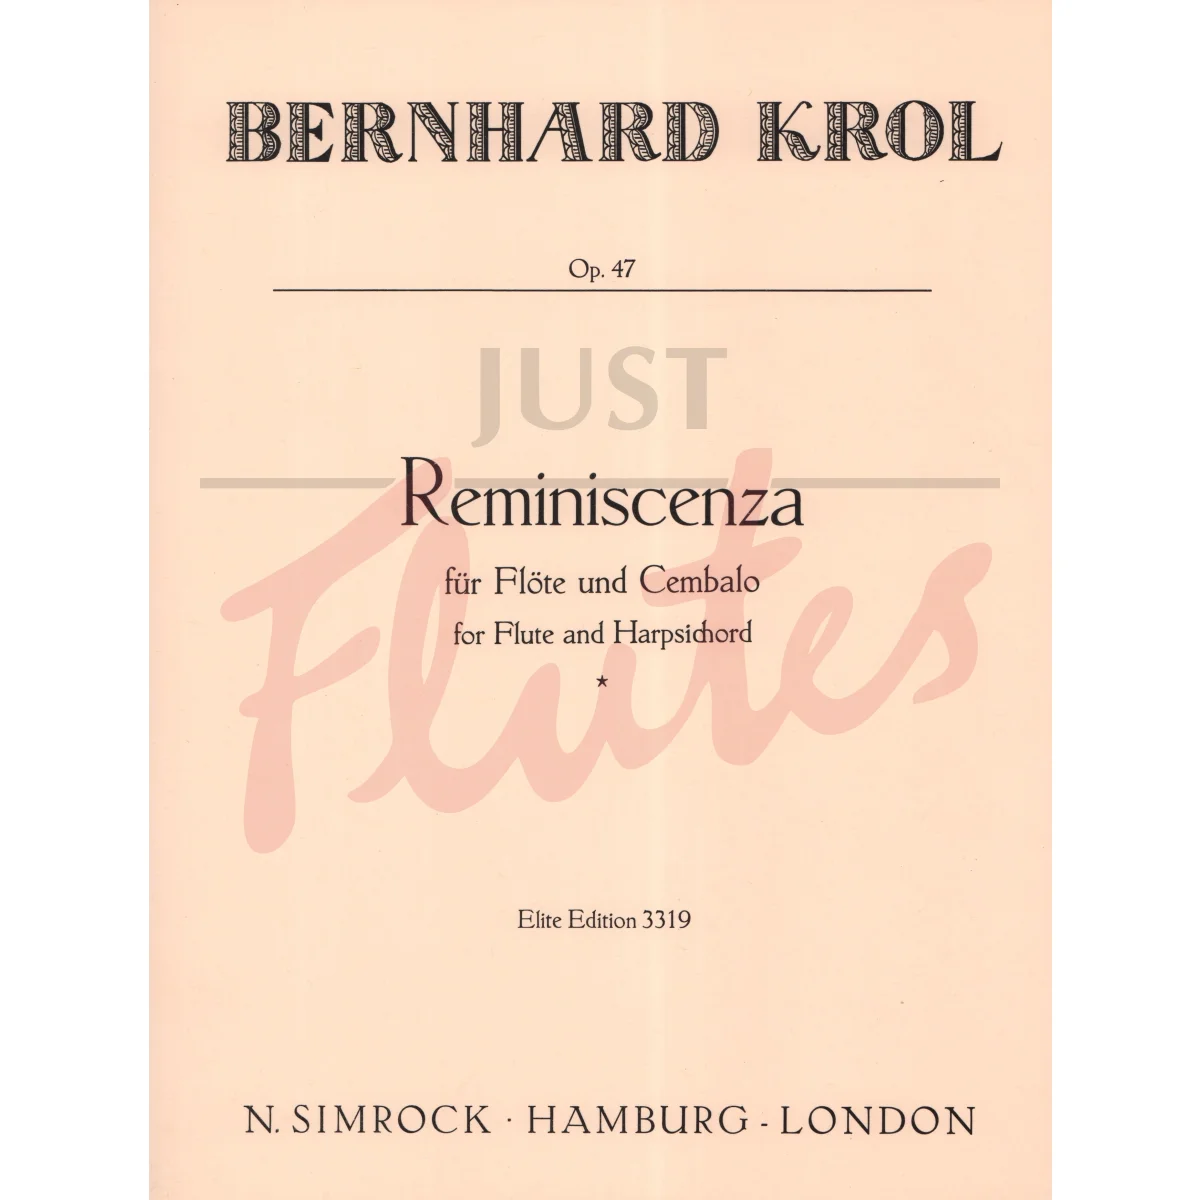 Reminiscenza for Flute and Harpsichord